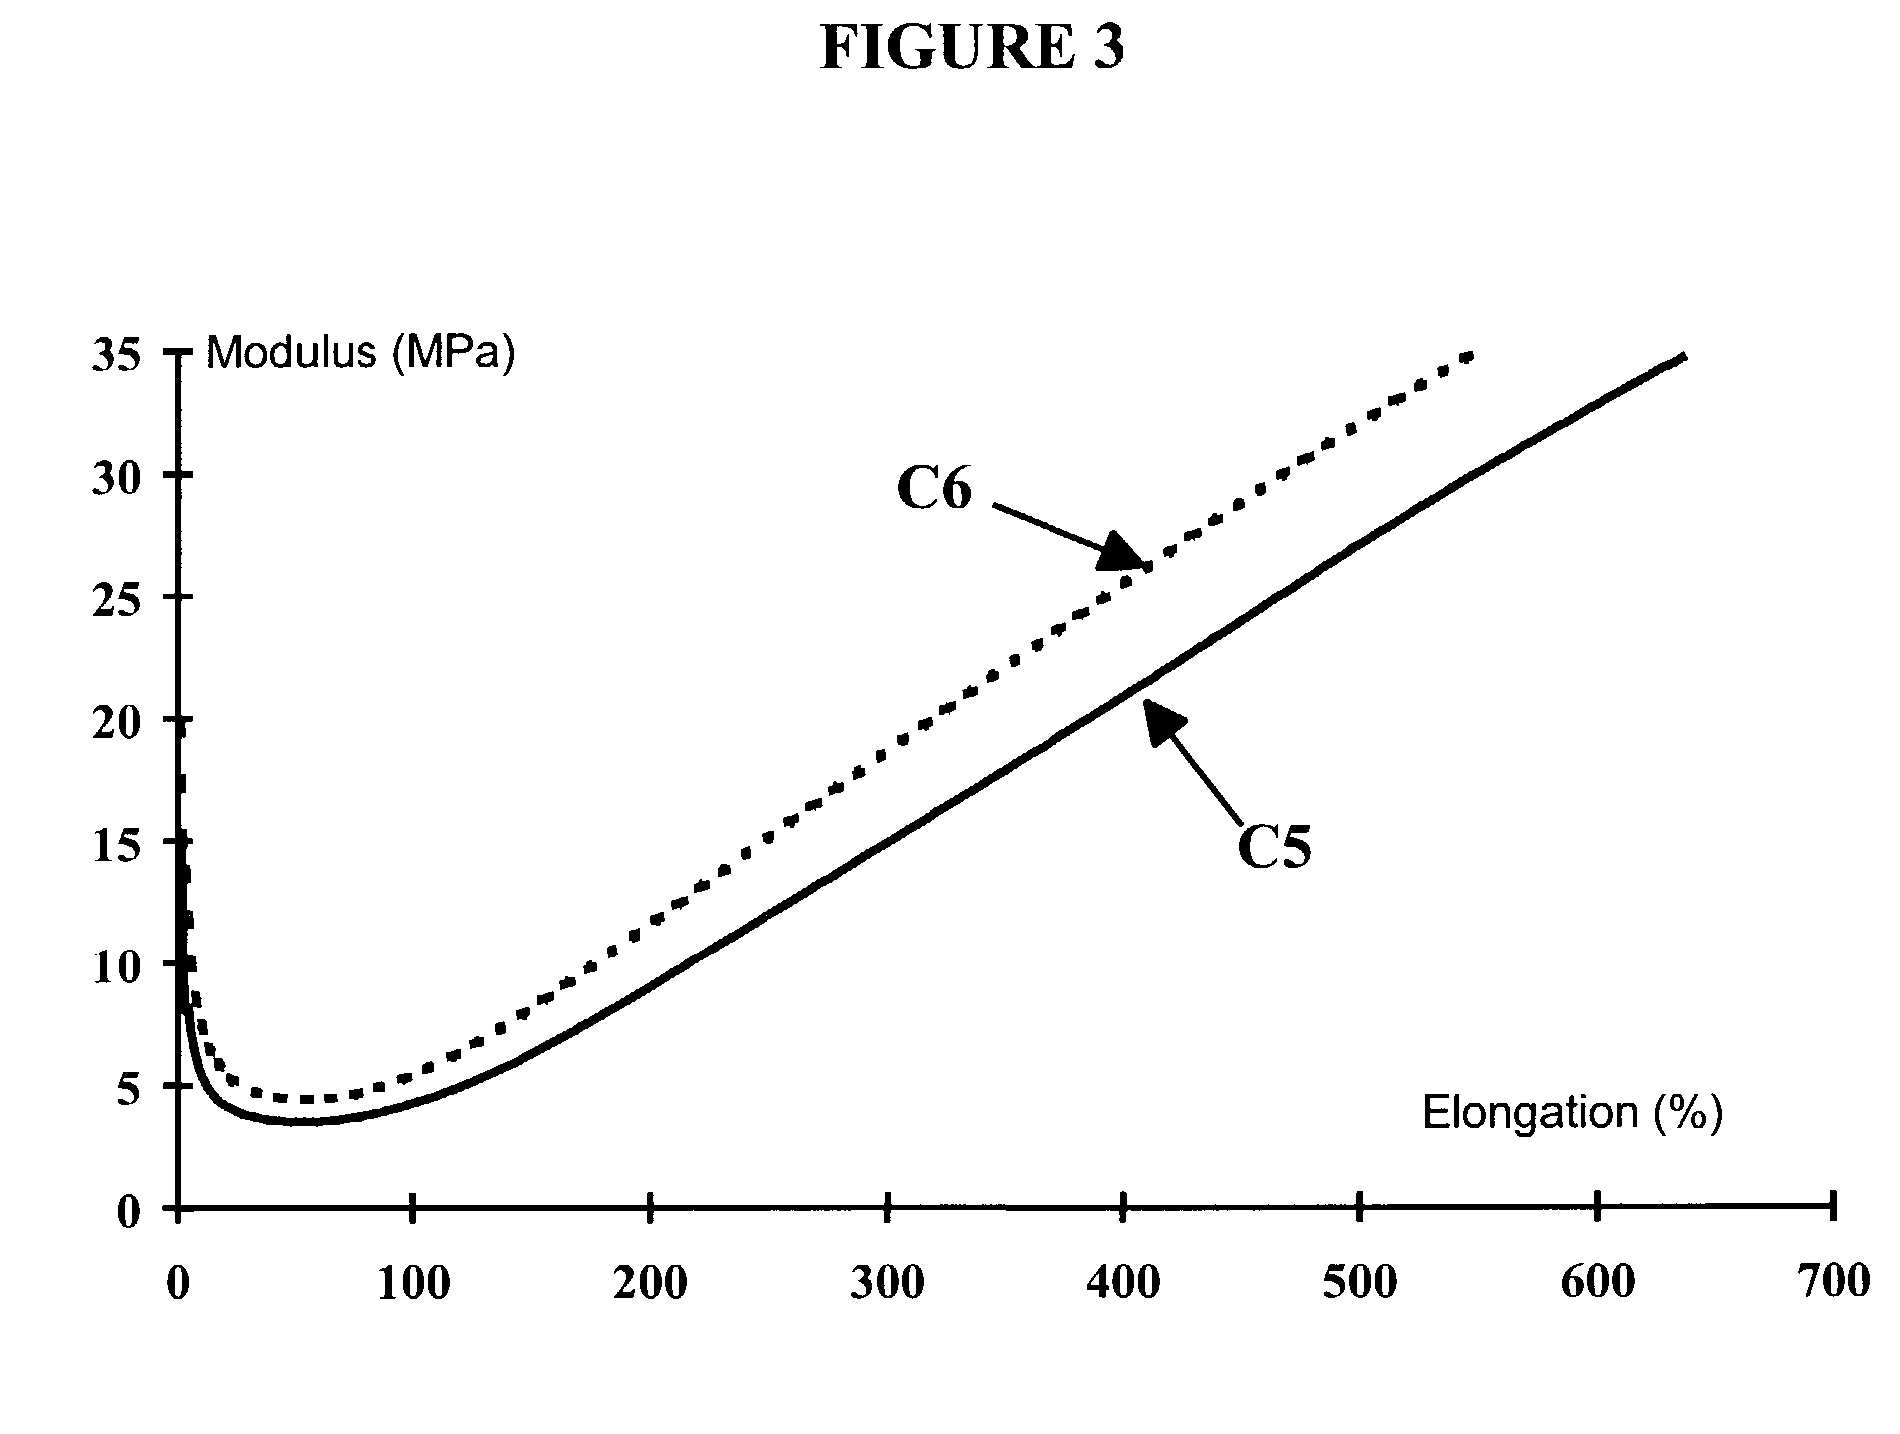 Rubber compositions for use in tires, comprising a (white filler/elastomer) coupling agent with an ester function